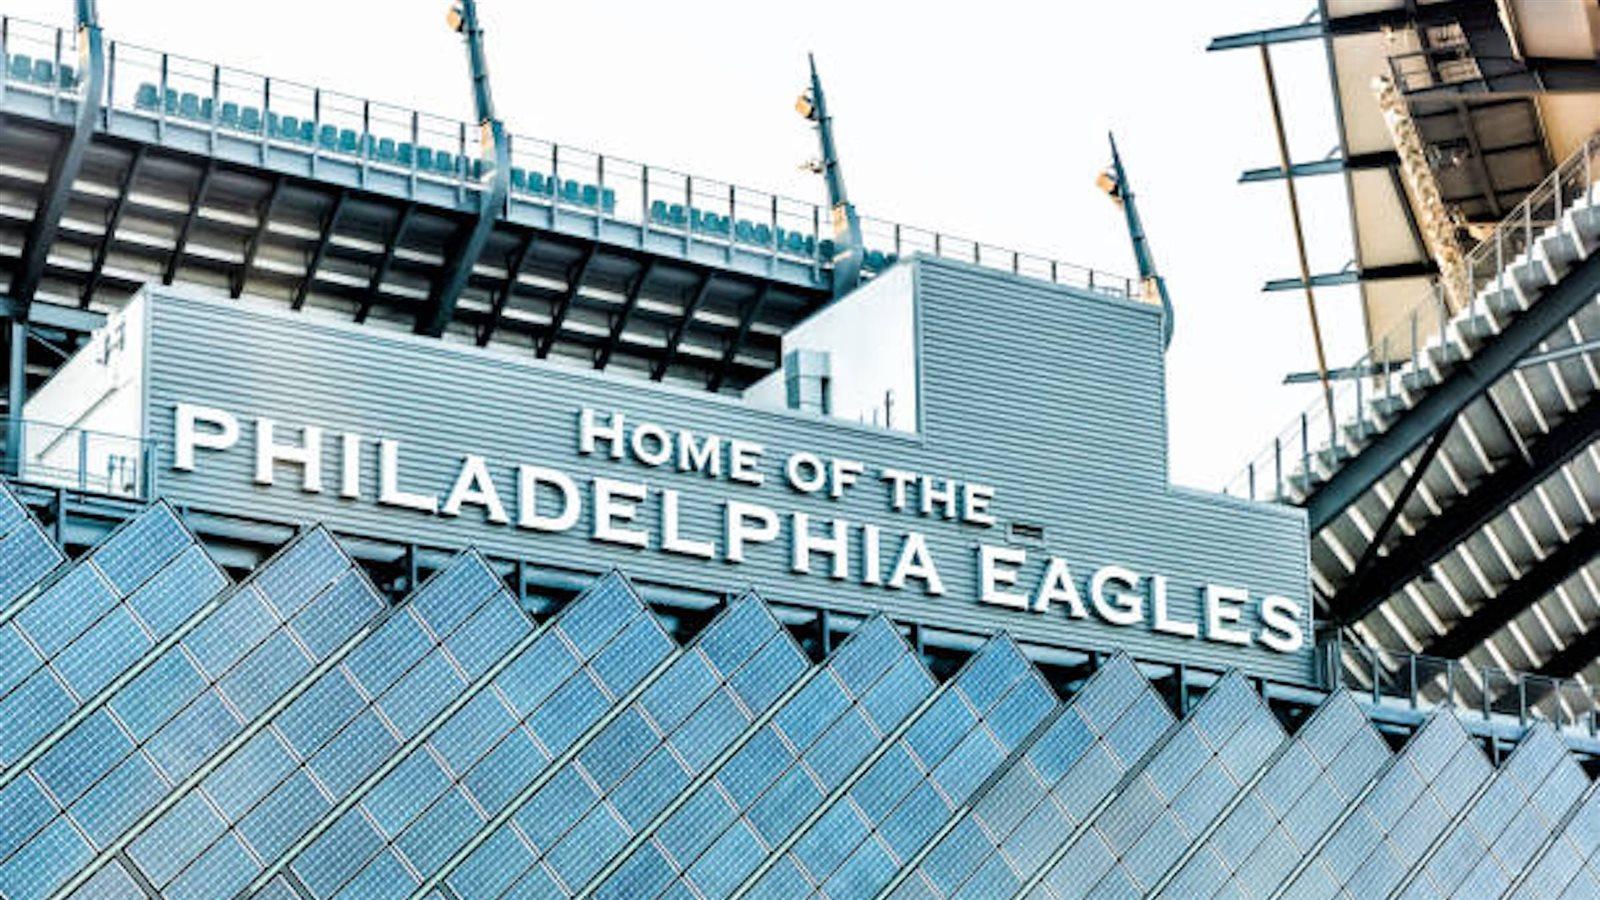 Philadelphia Eagles Fans: What It Means to “Bleed Green